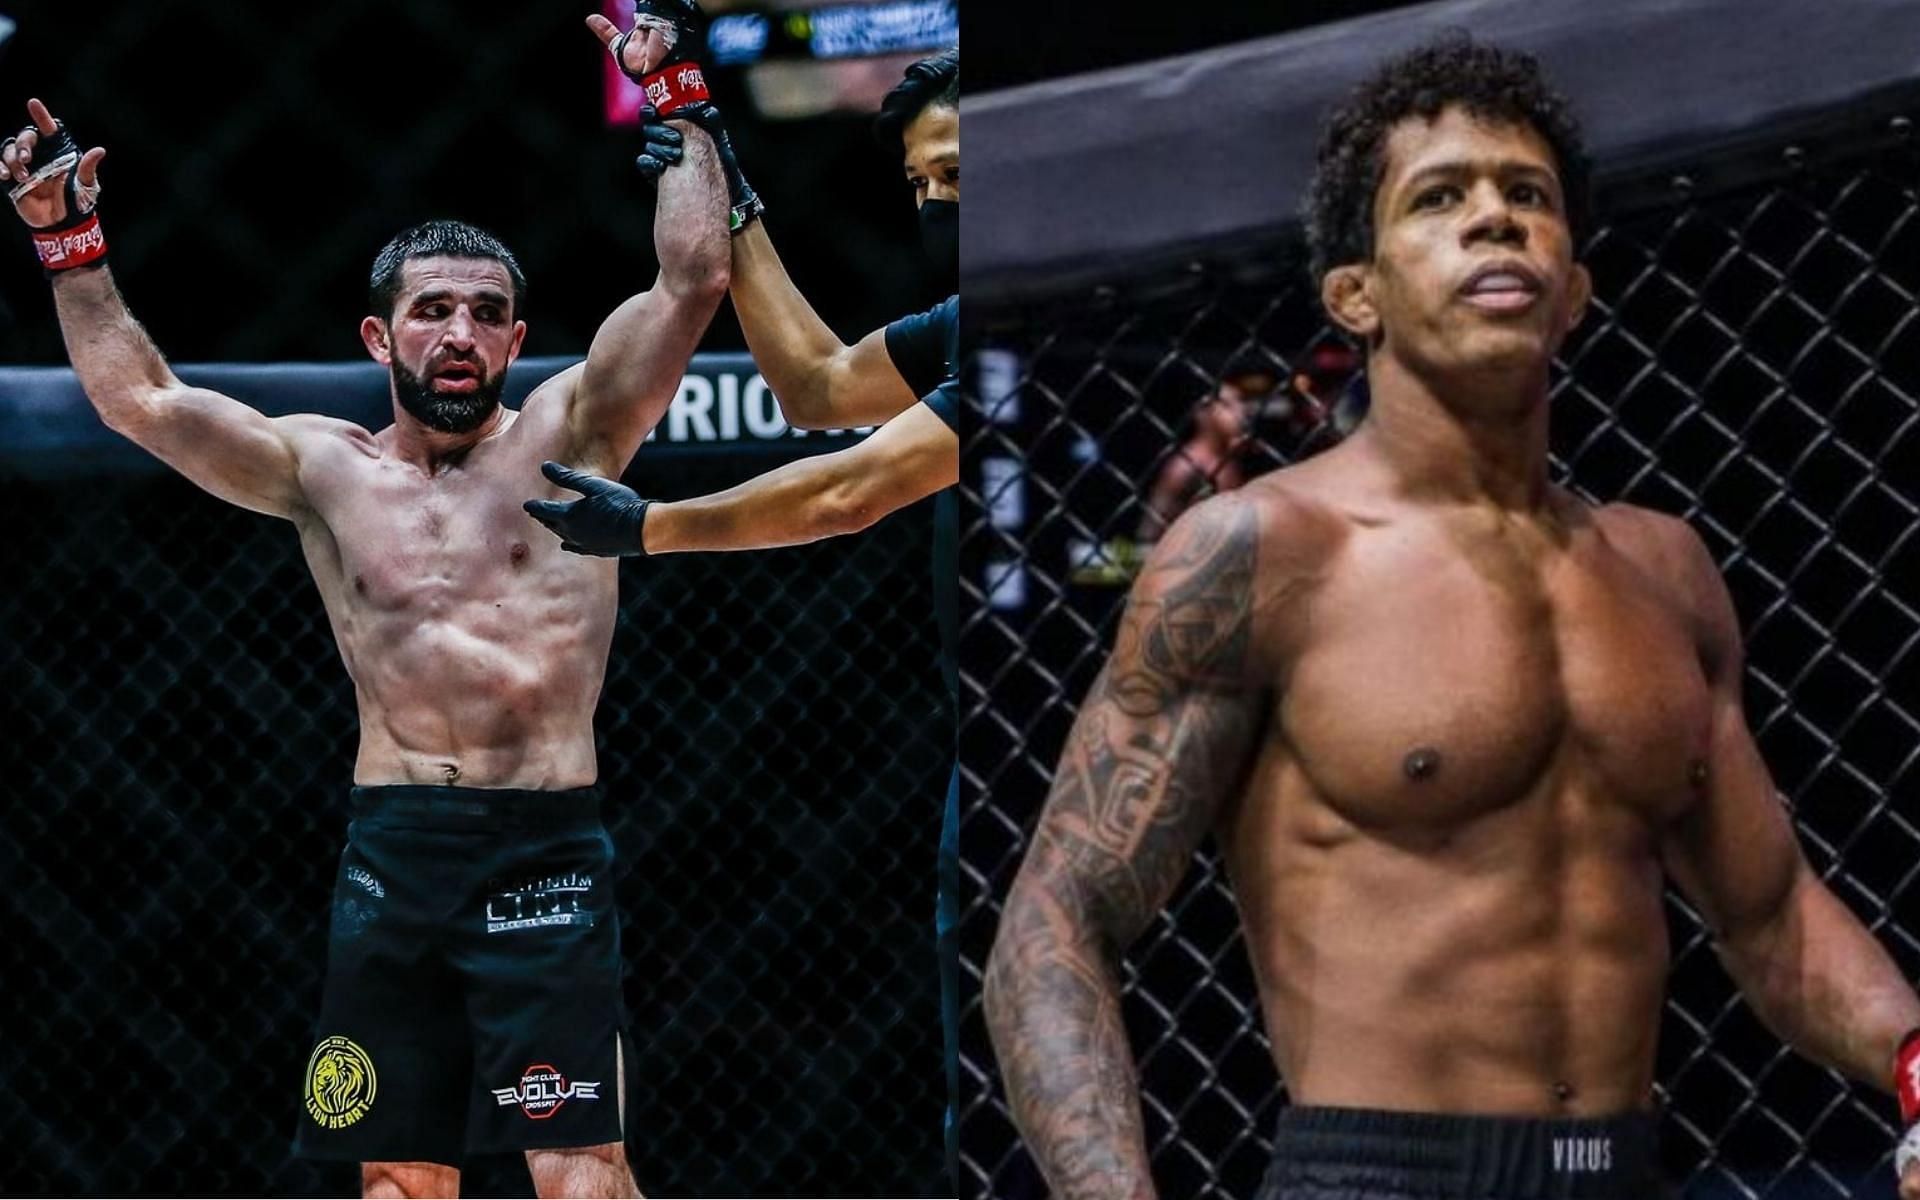 ONE Championship grappling wizard Yusup Saadulaev once beat ONE flyweight world champion Adriano Moraes in 2013. (Images courtesy of ONE Championship)